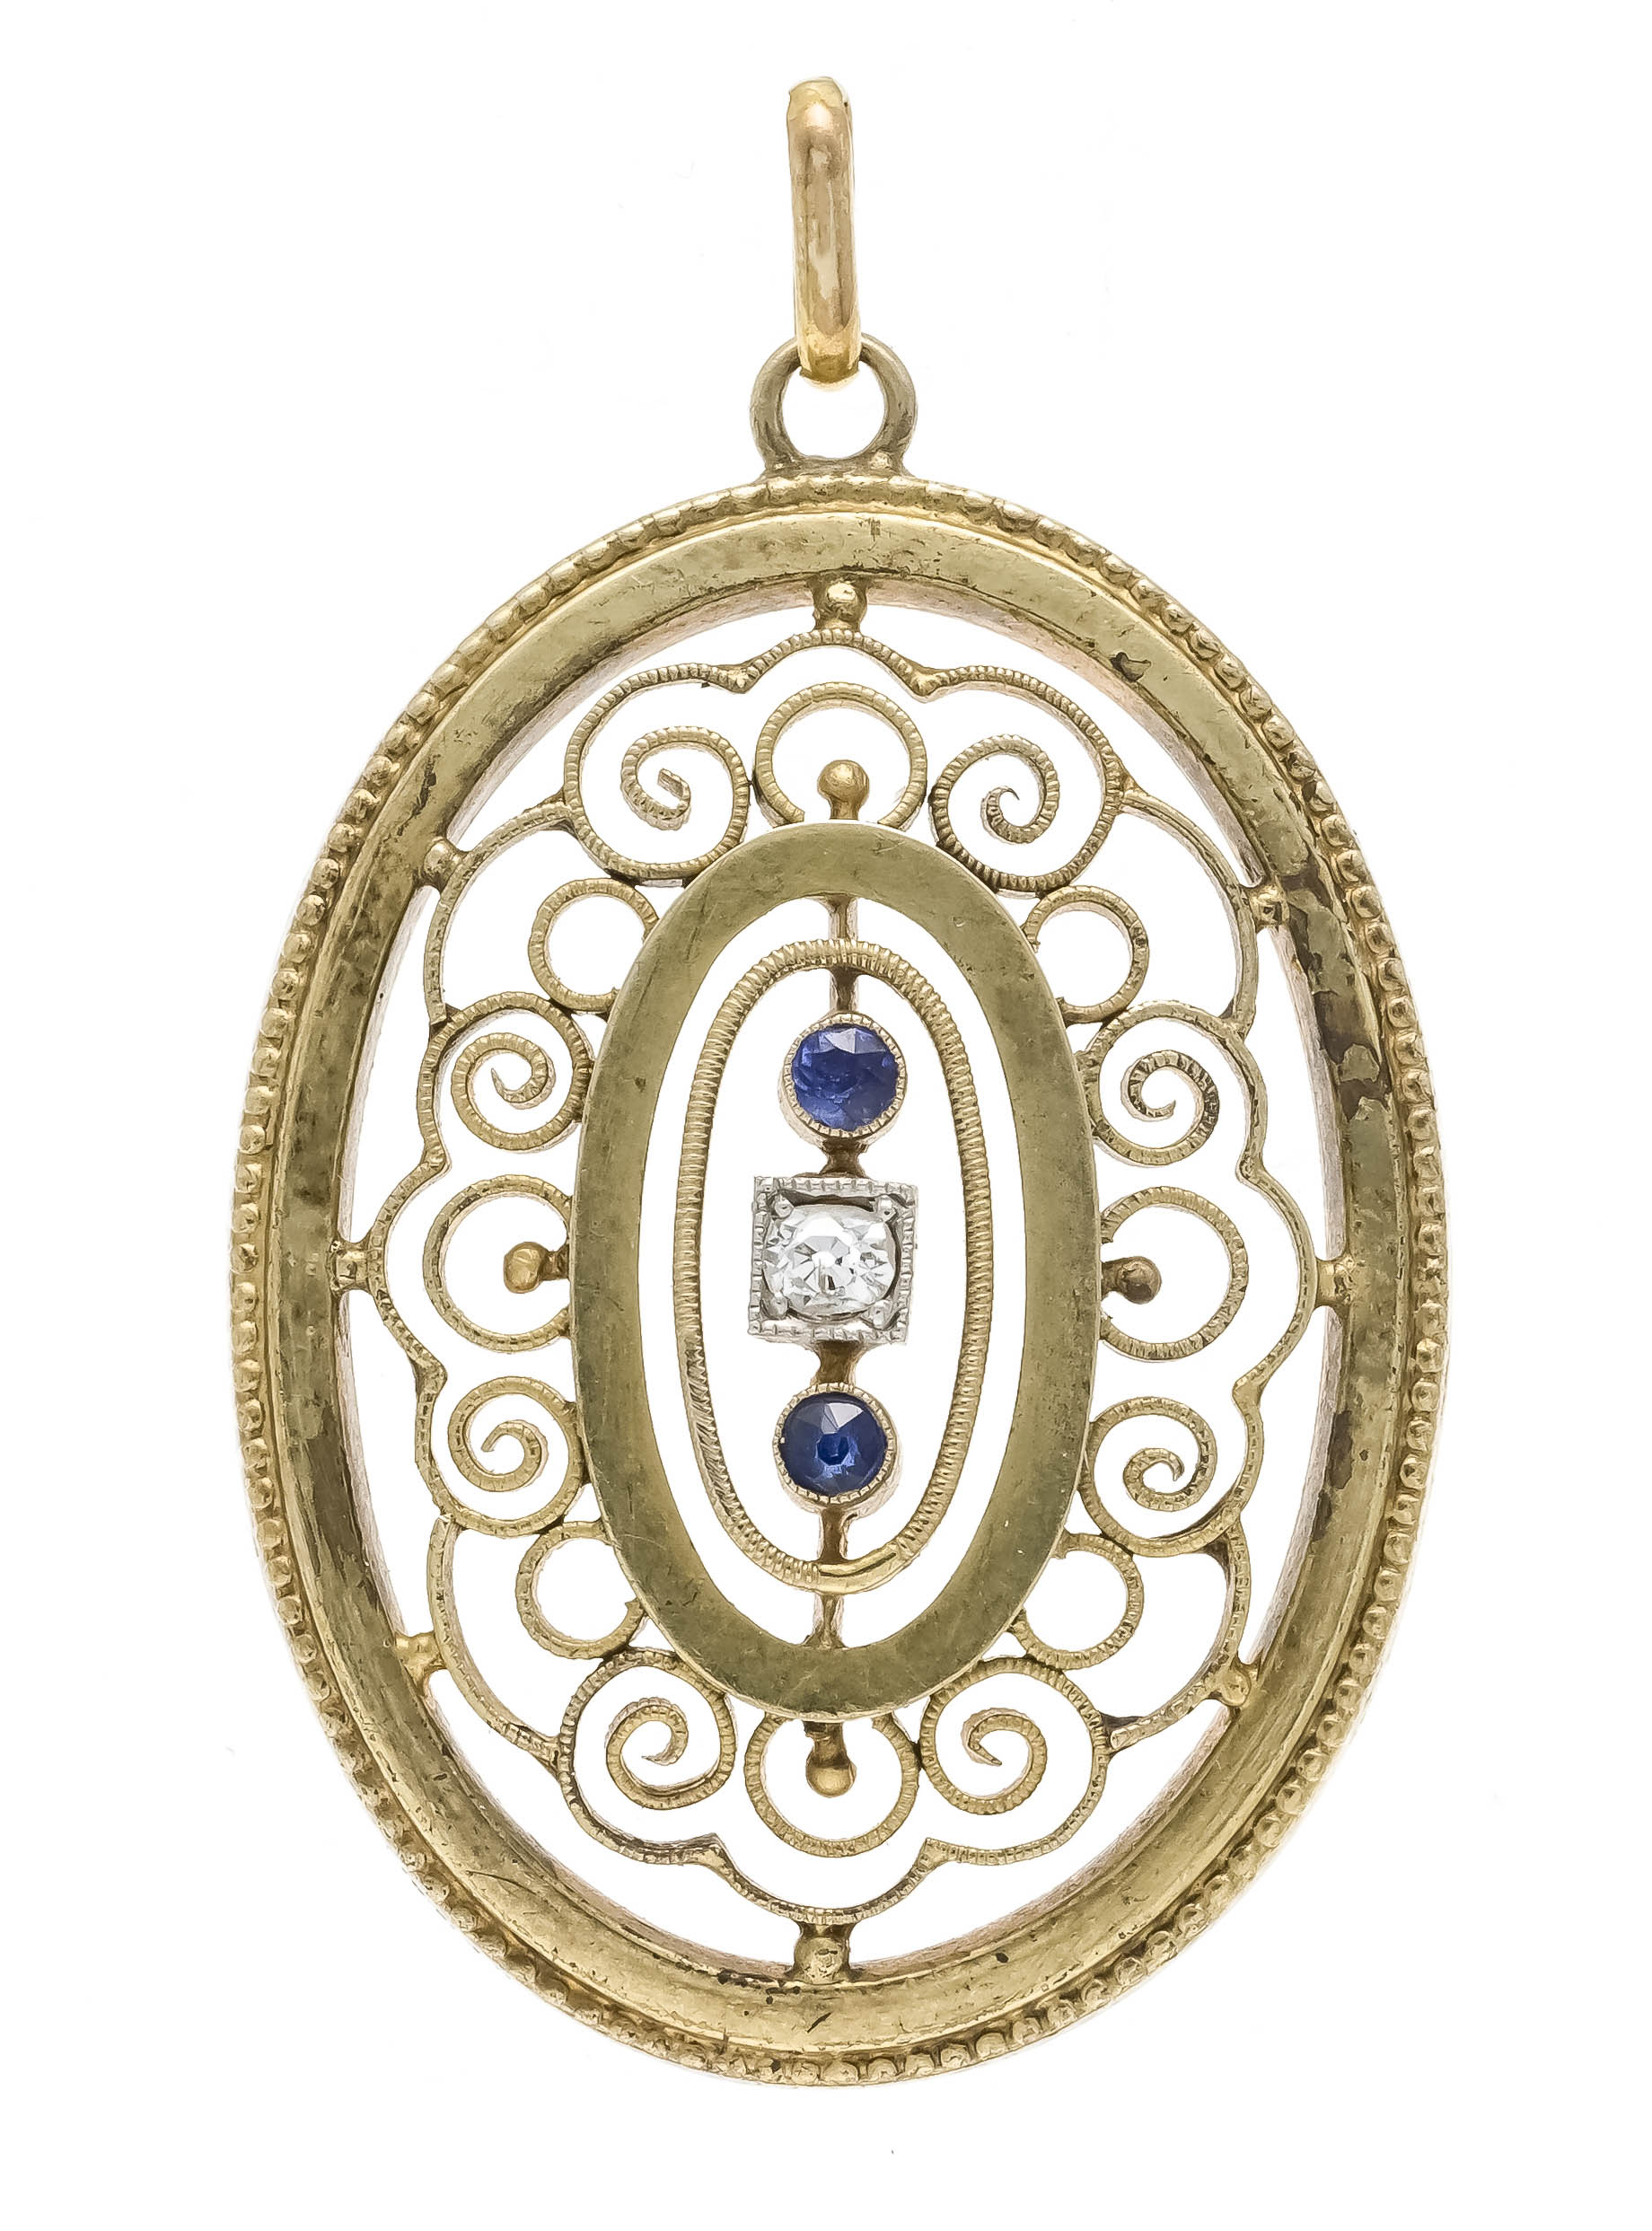 Filigree old-cut diamond pendant GG 585/000 with 2 round faceted sapphires 1.8 mm (possibly